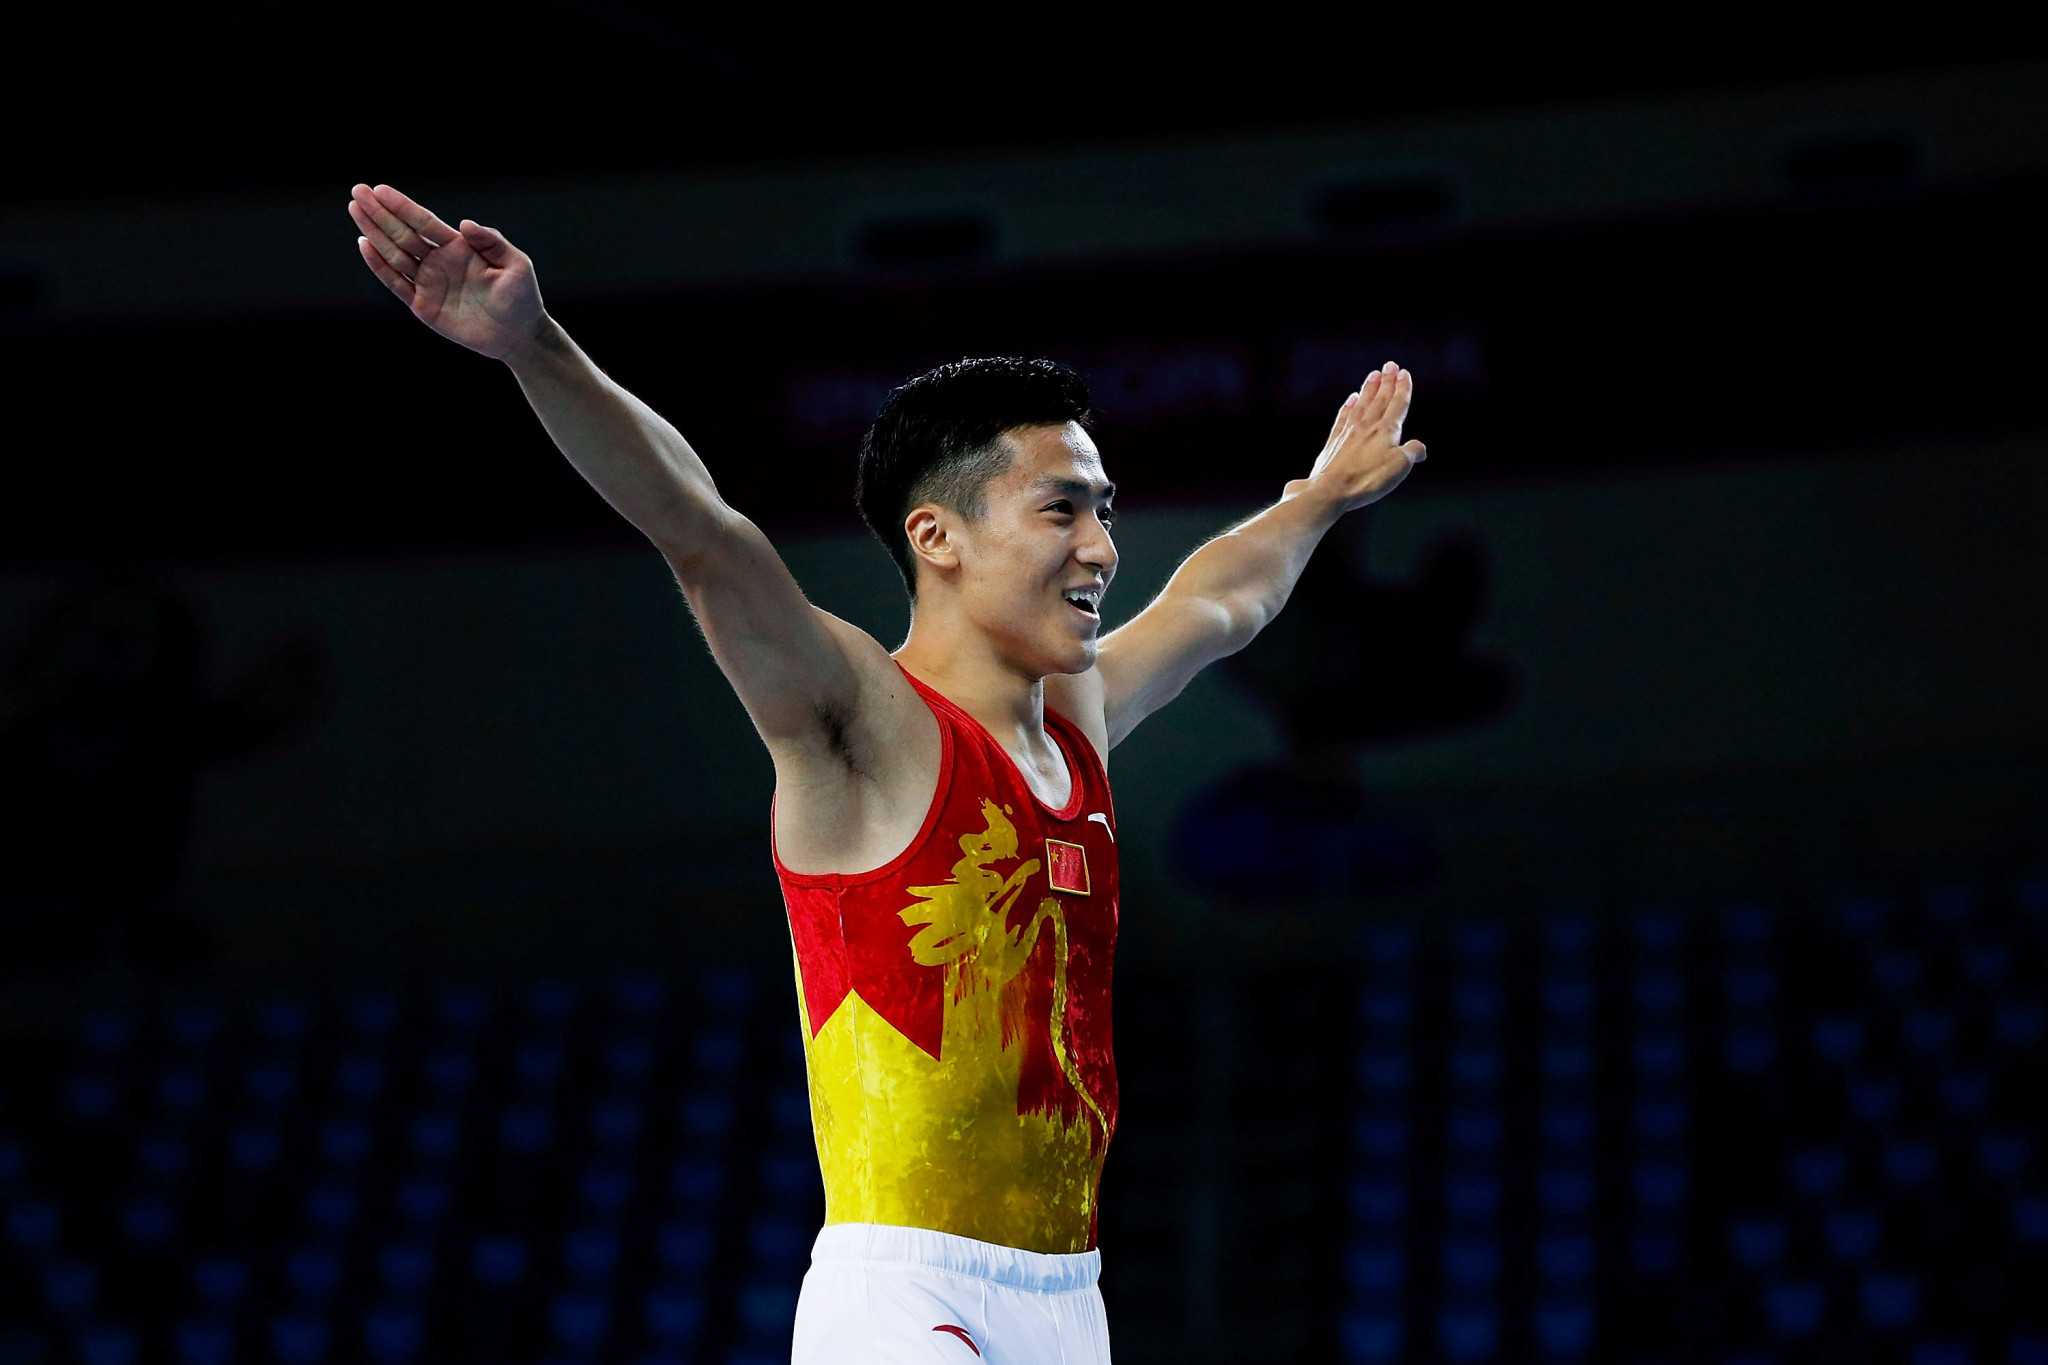 Rio 2016 silver medallist Dong Dong of China will be in action in the men's event ©Getty Images